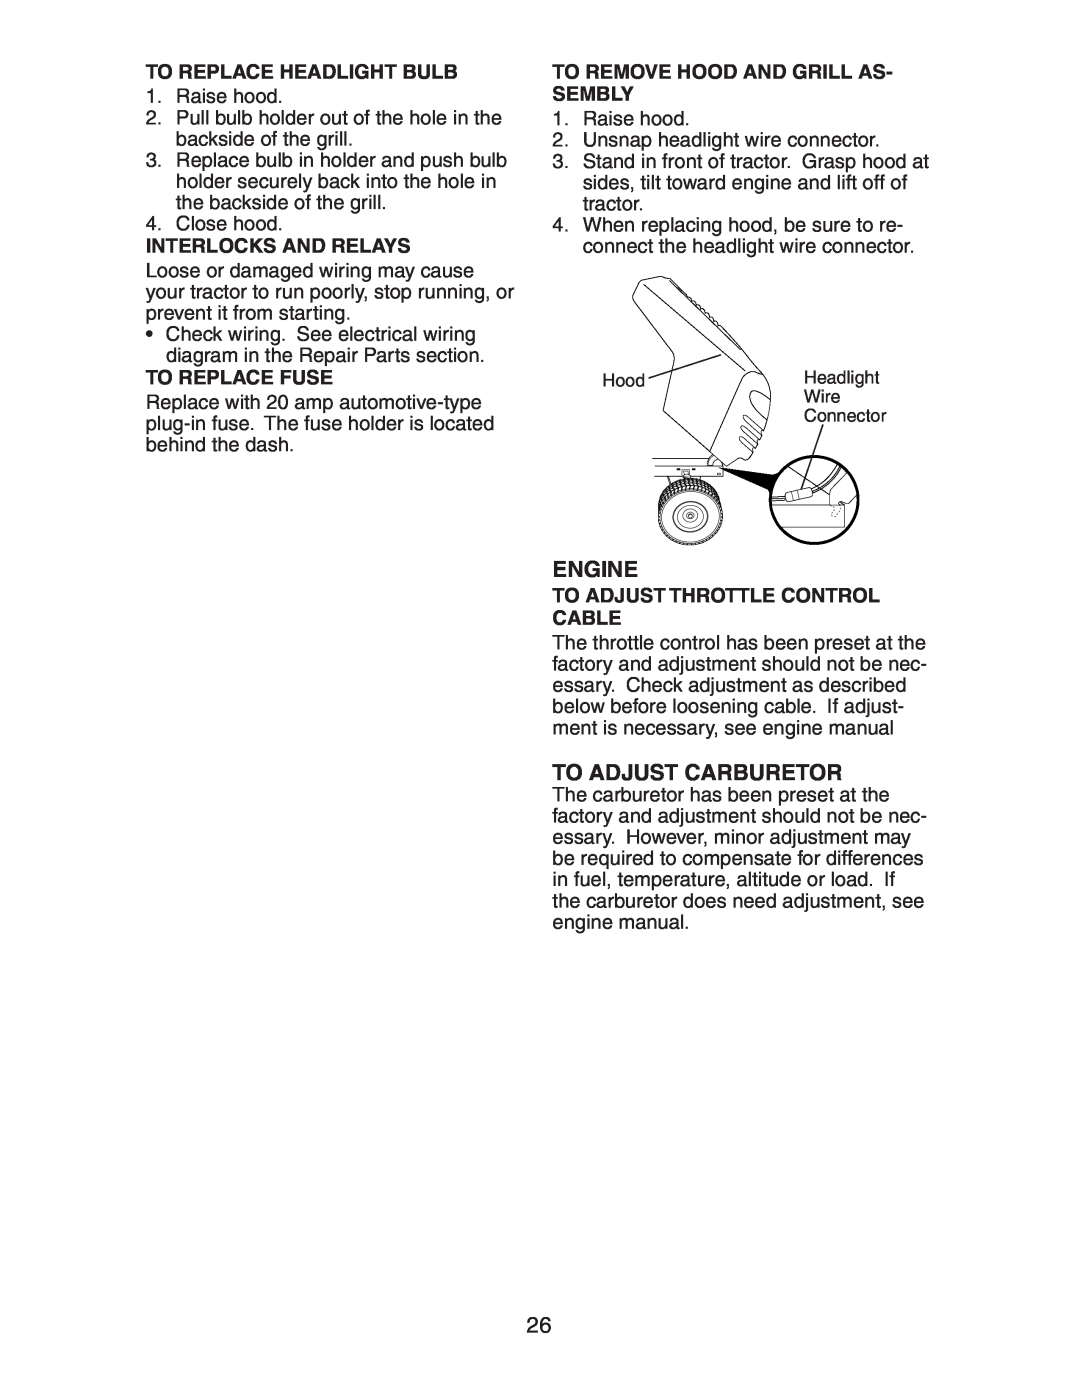 Electrolux AG15538A manual To Adjust Carburetor, To Replace Headlight Bulb, Interlocks And Relays, To Replace Fuse, Engine 